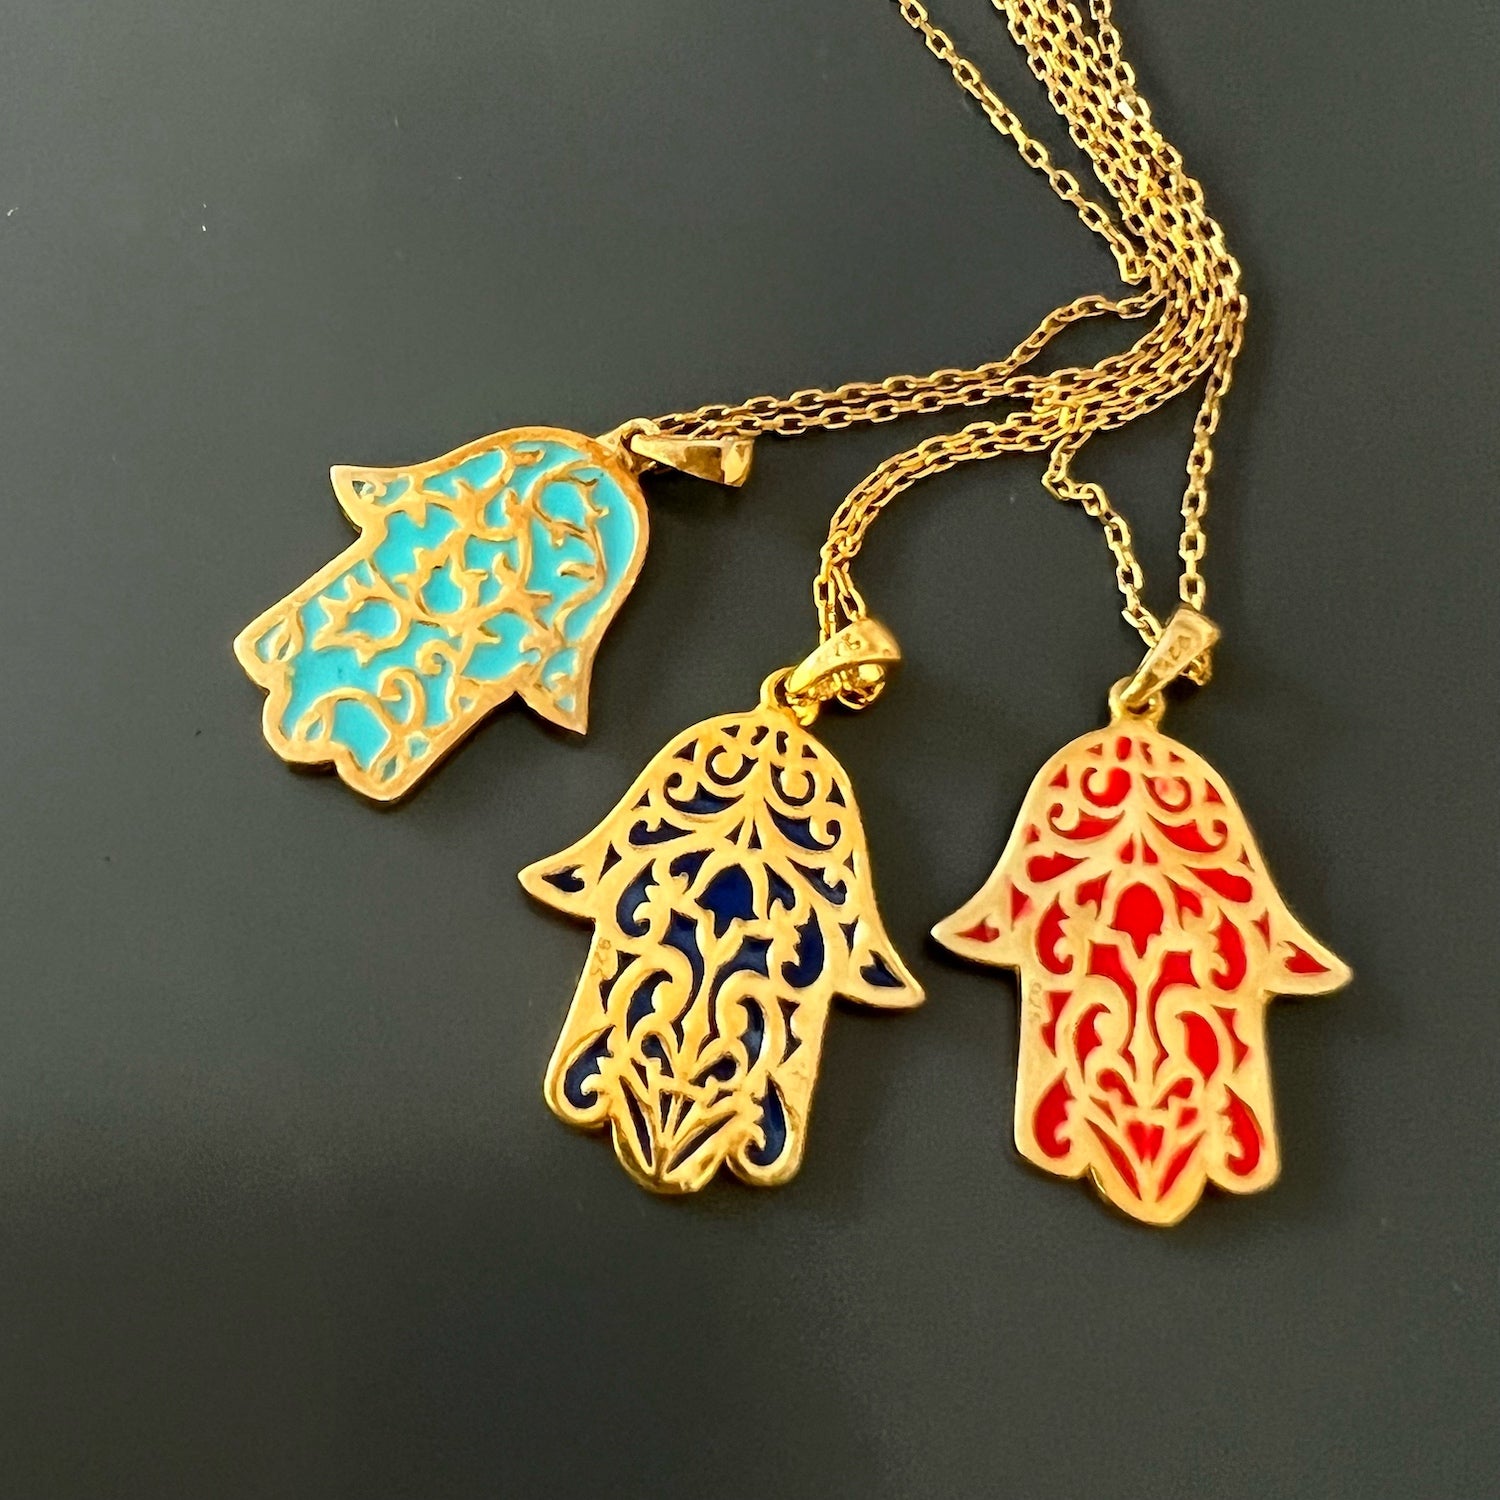 The Stay Positive Hamsa Necklace exudes style and spirituality, with its vibrant hamsa pendant made of sterling silver and 18K gold plating with colorful enamel accents, reminding you to stay positive.